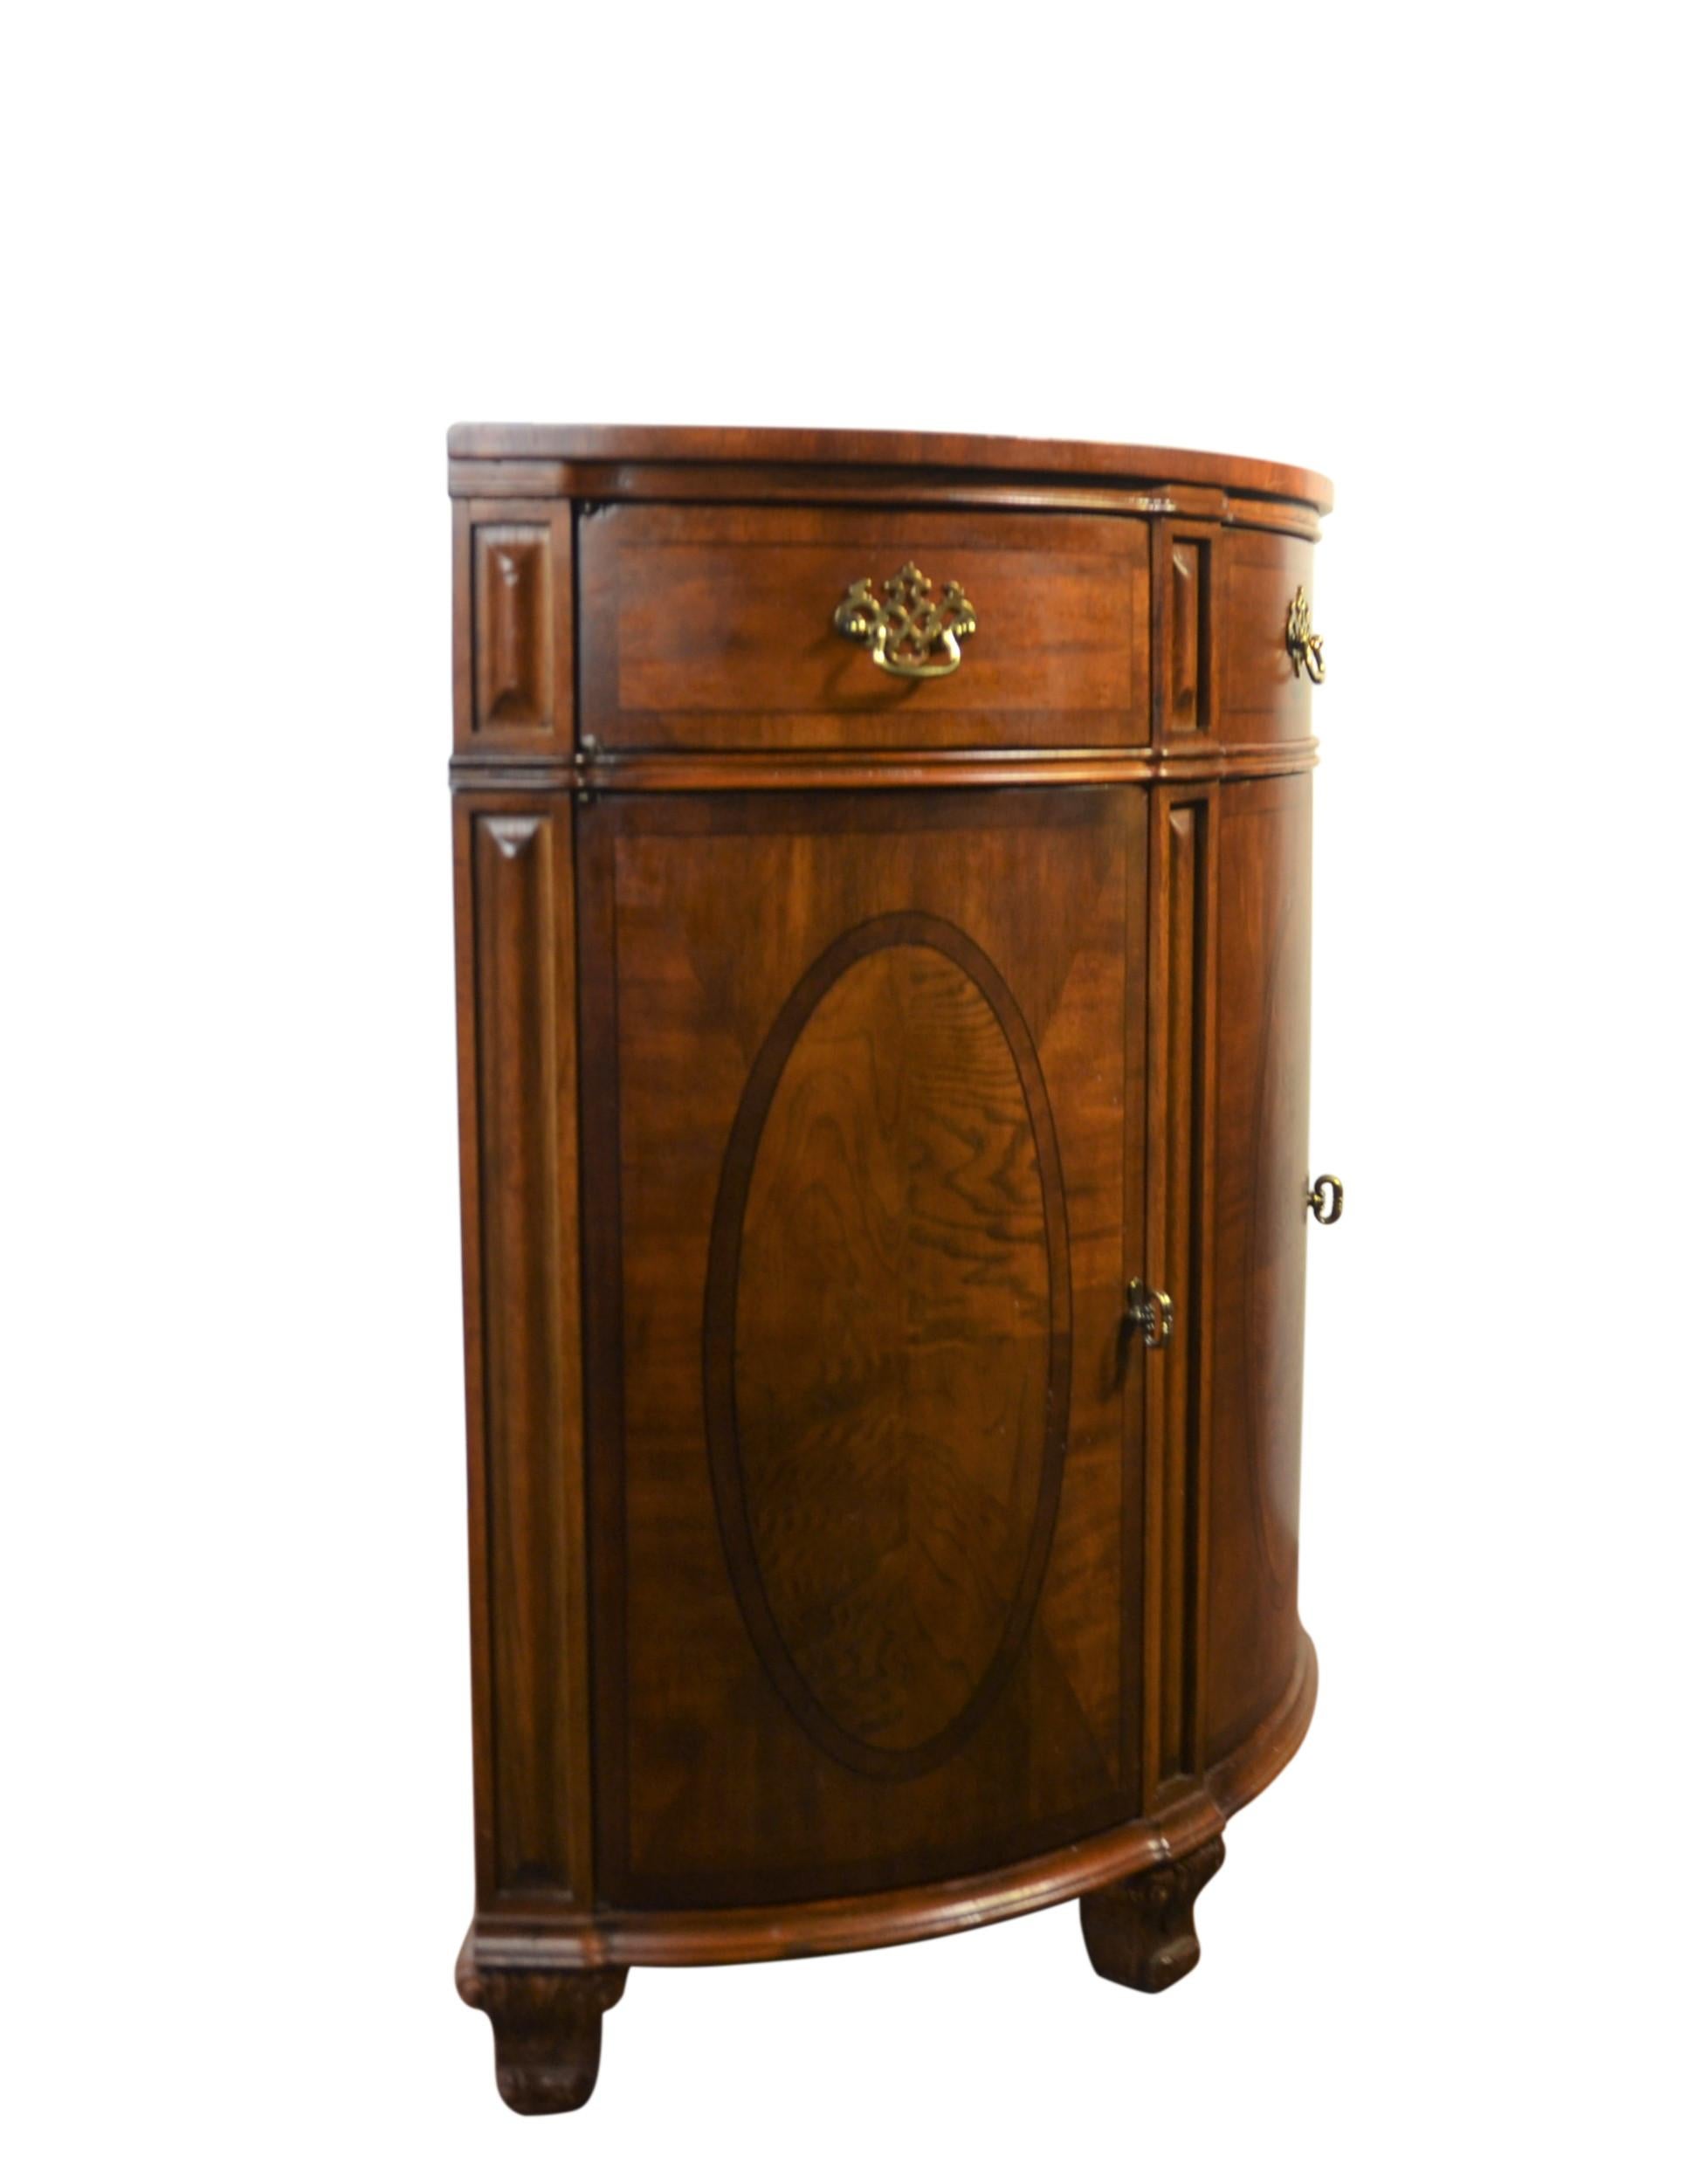 Mahogany demilune console/cabinet. Faux-drawer on top and four doors on bottom for storage. Brass pulls.